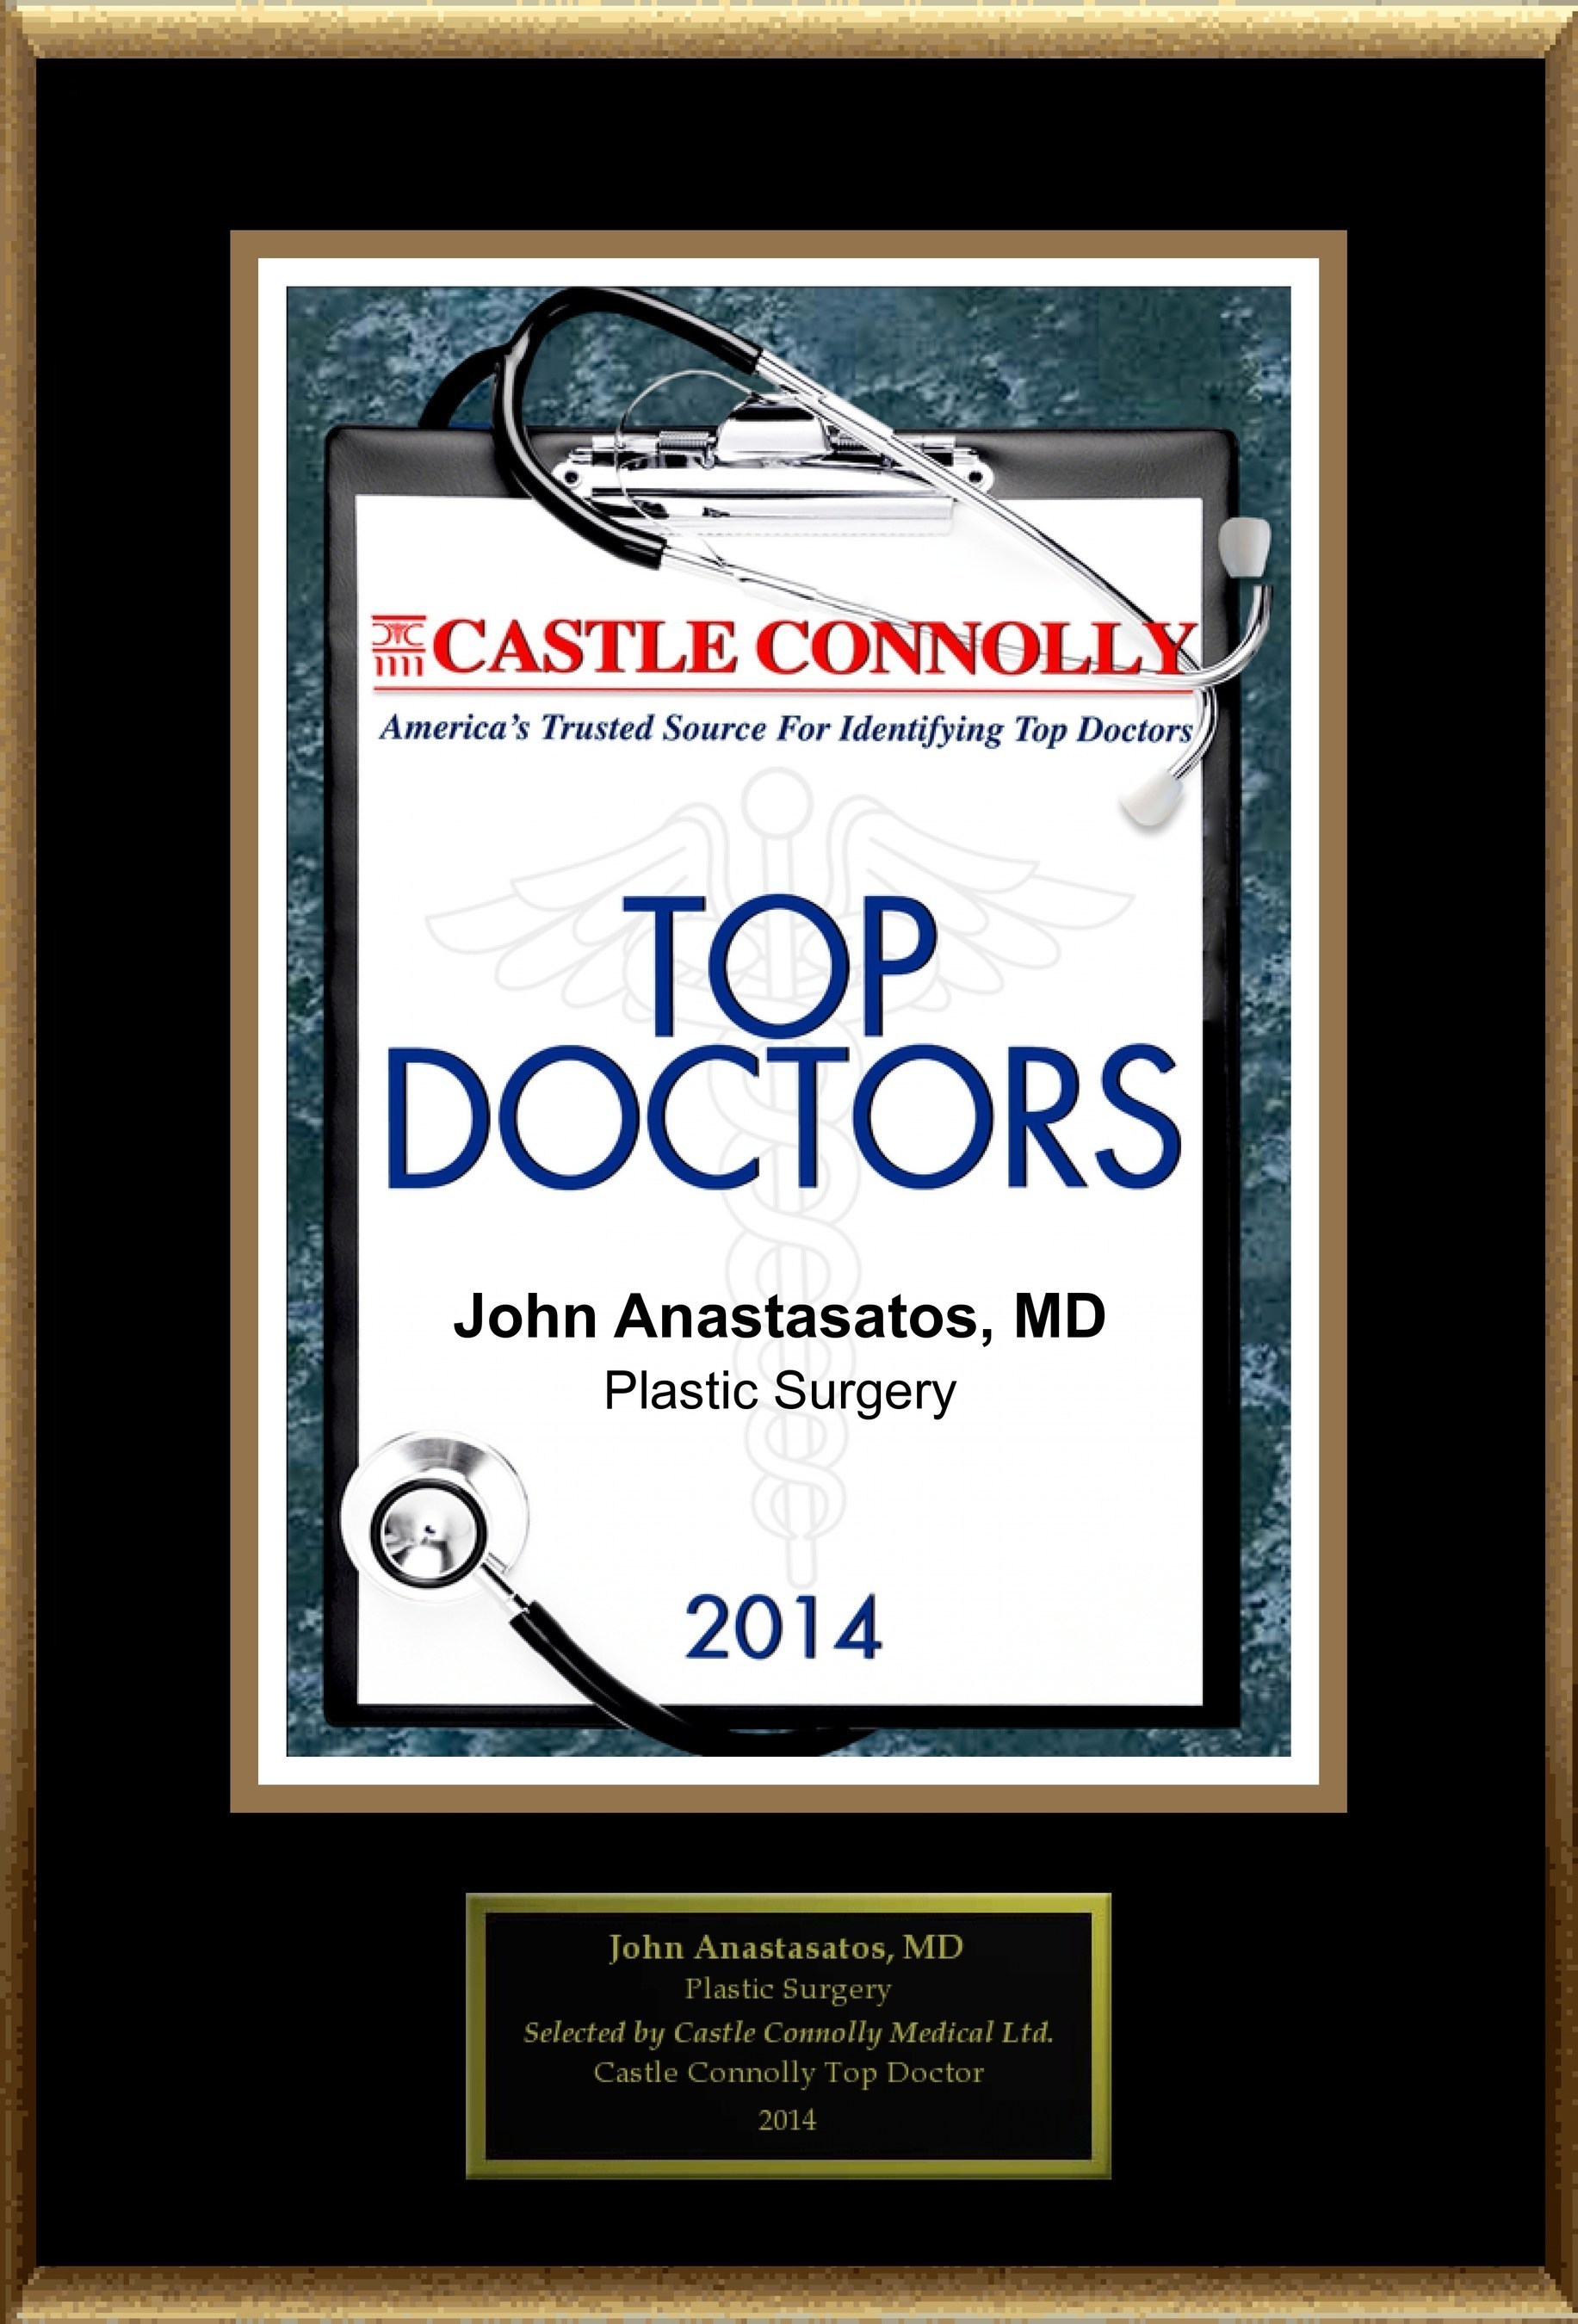 Dr. John Anastasatos is recognized among Castle Connolly's Top Doctors(R) for Beverly Hills, CA region in 2014.